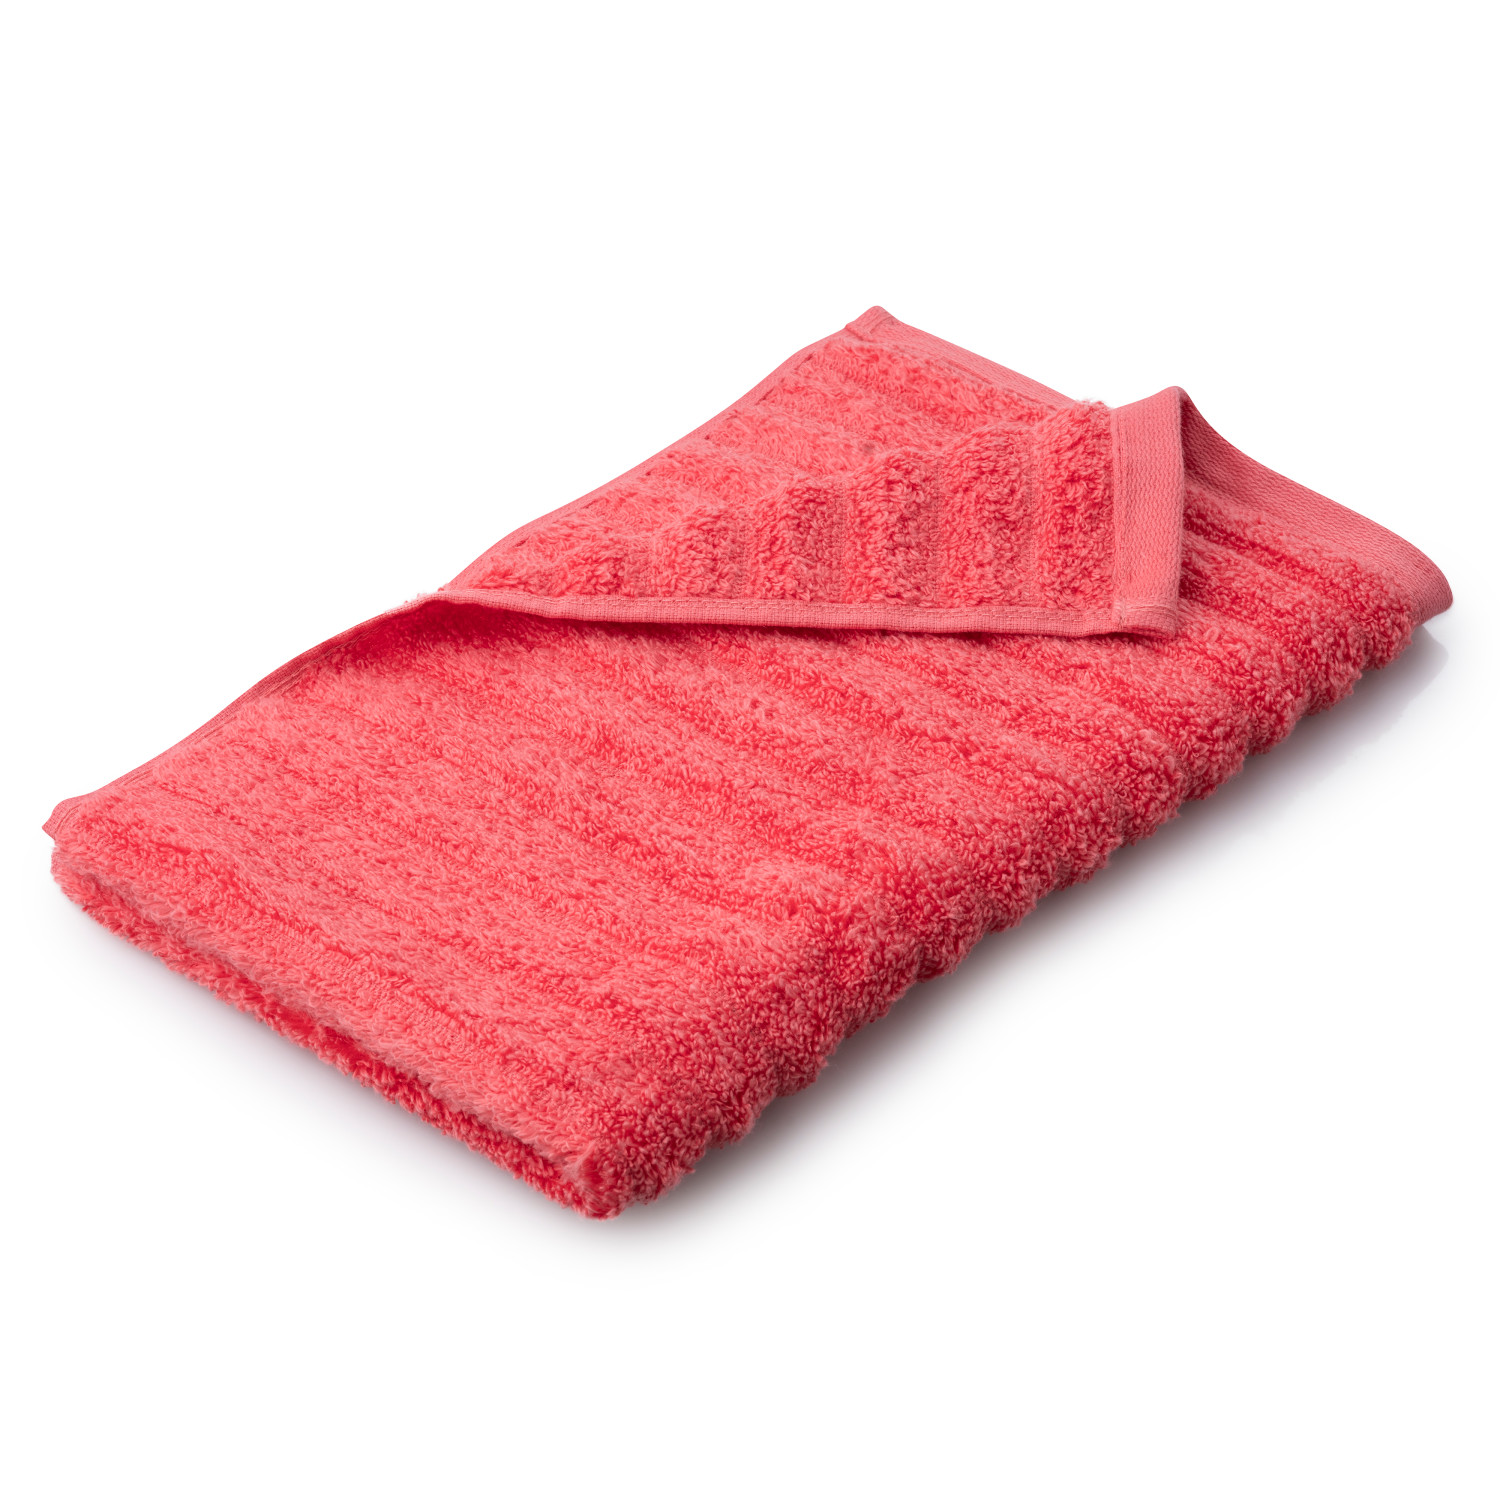 Mainstays Performance 6-Piece Towel Set, Textured Island Coral - image 4 of 7